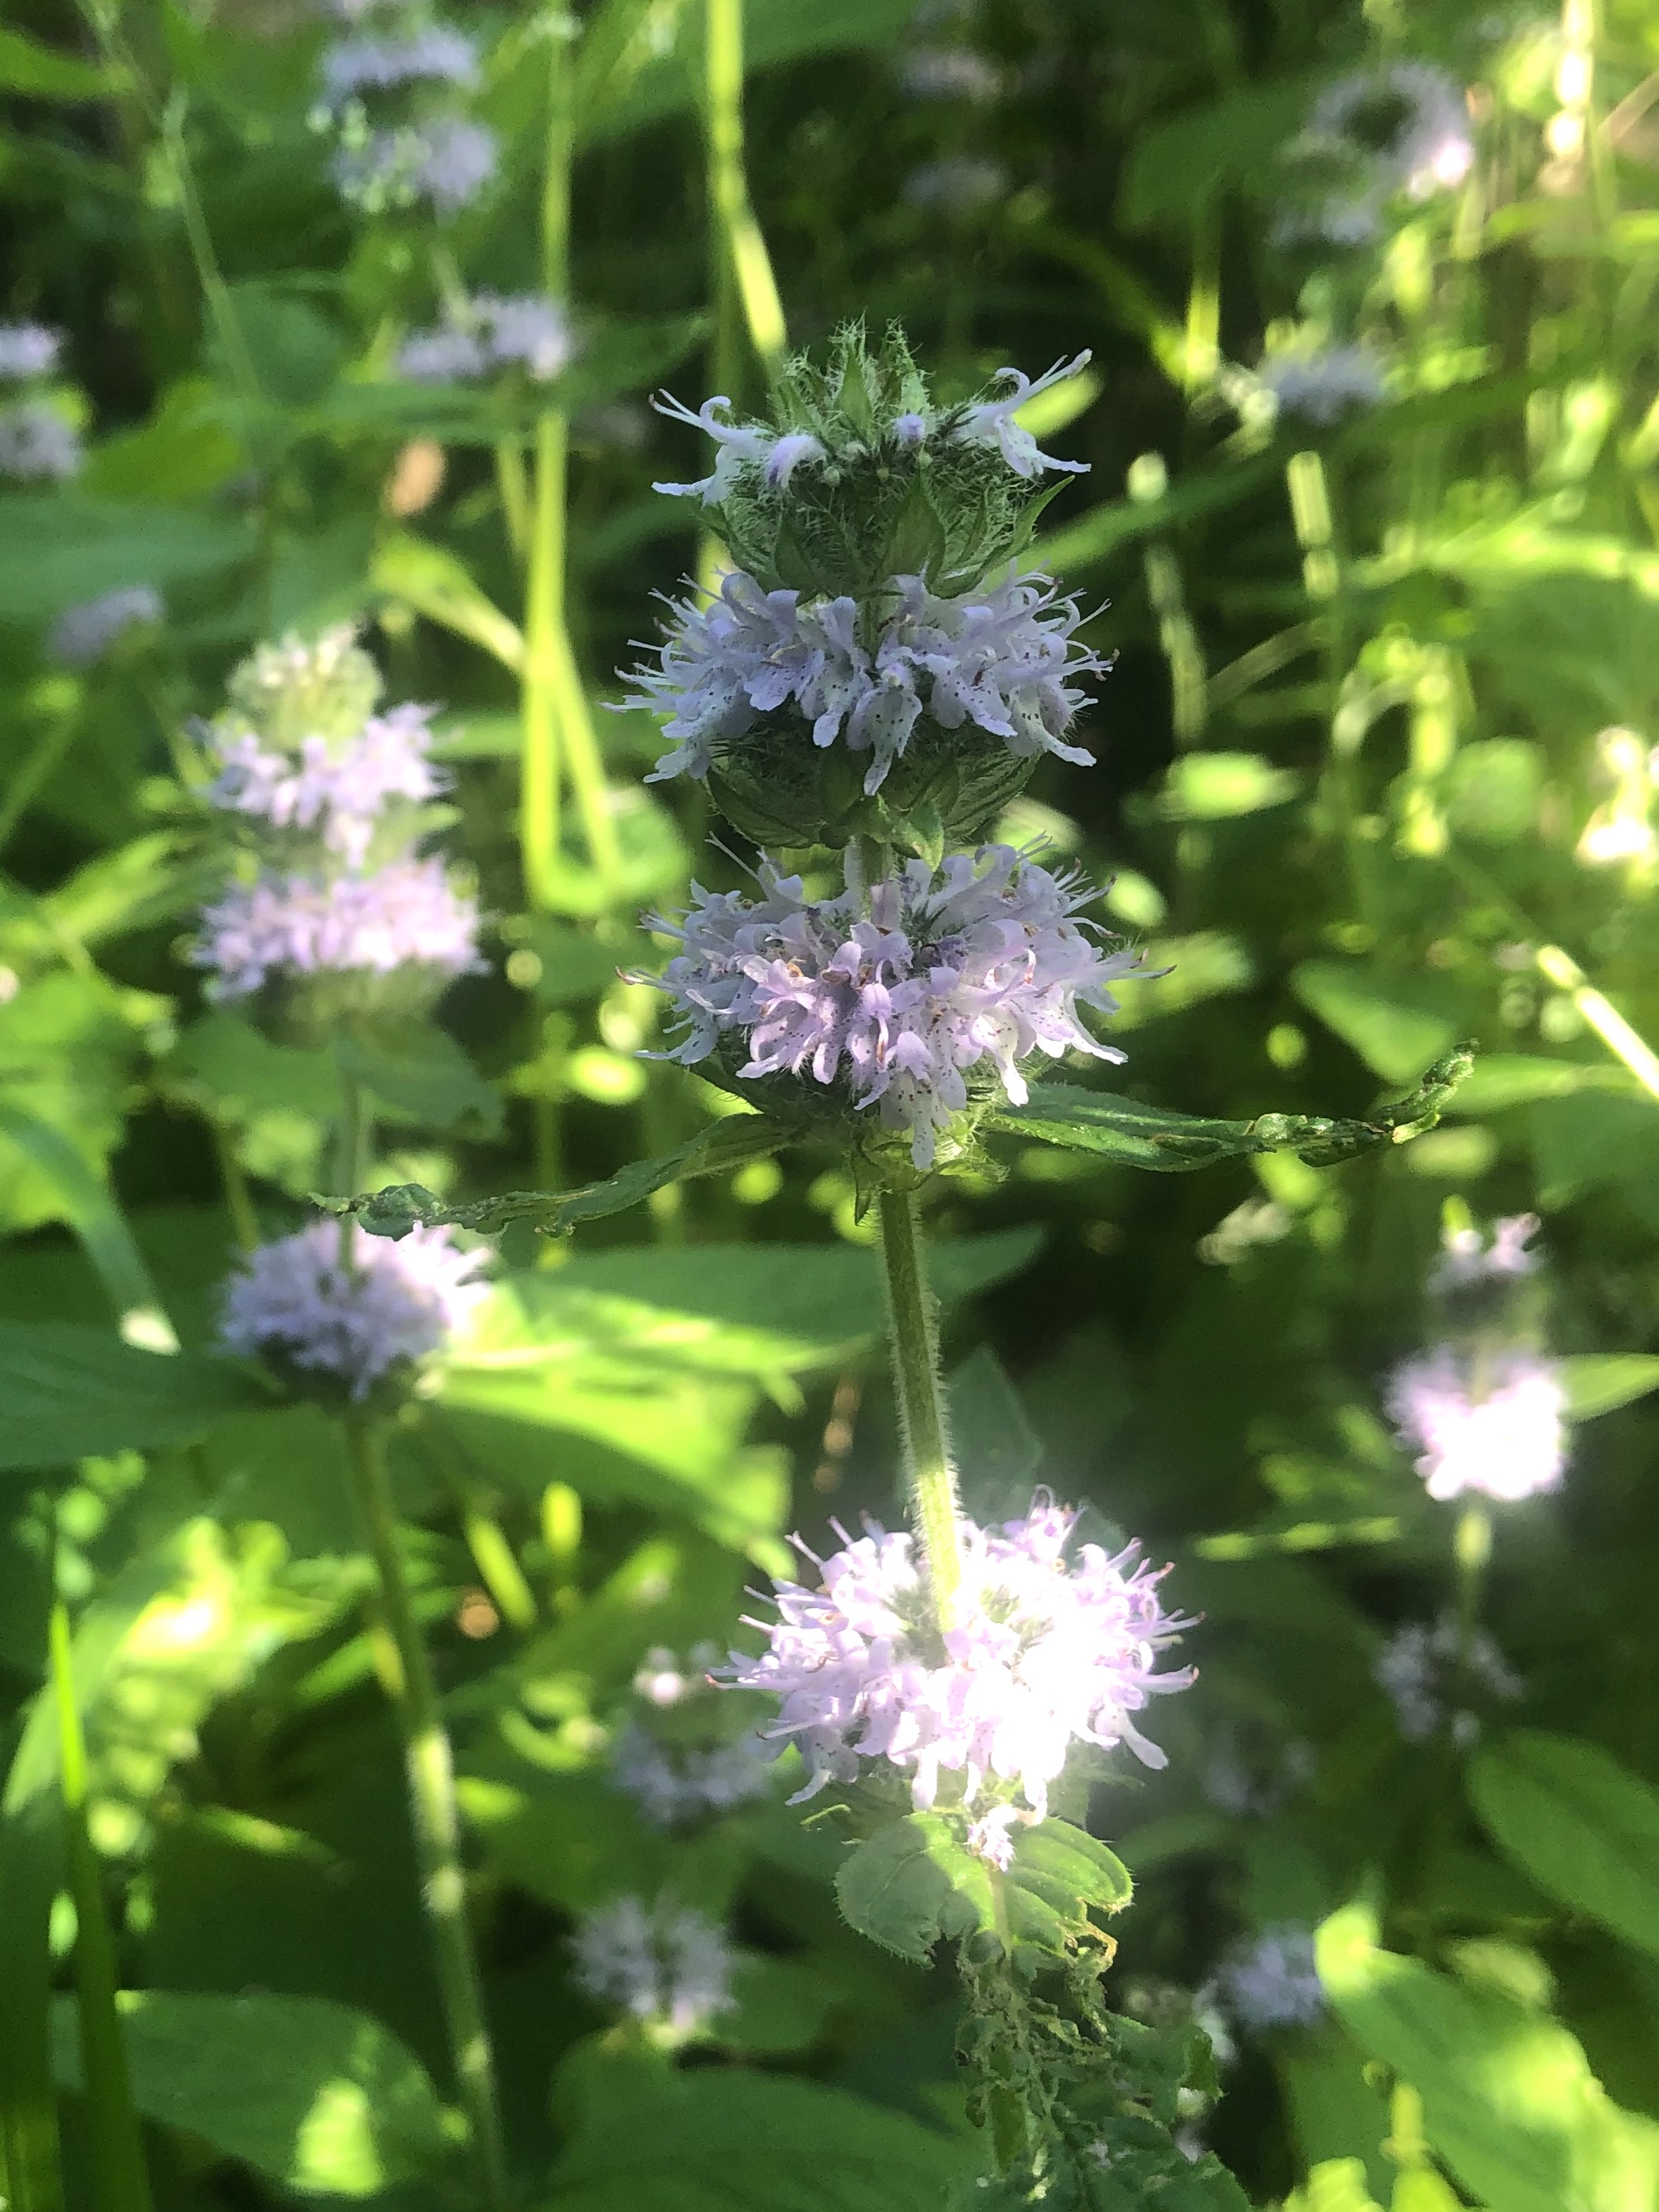 Downy Pagoda-plant near Council Ring in Oak Savana in Madison, Wisconsin on June 19, 2022.